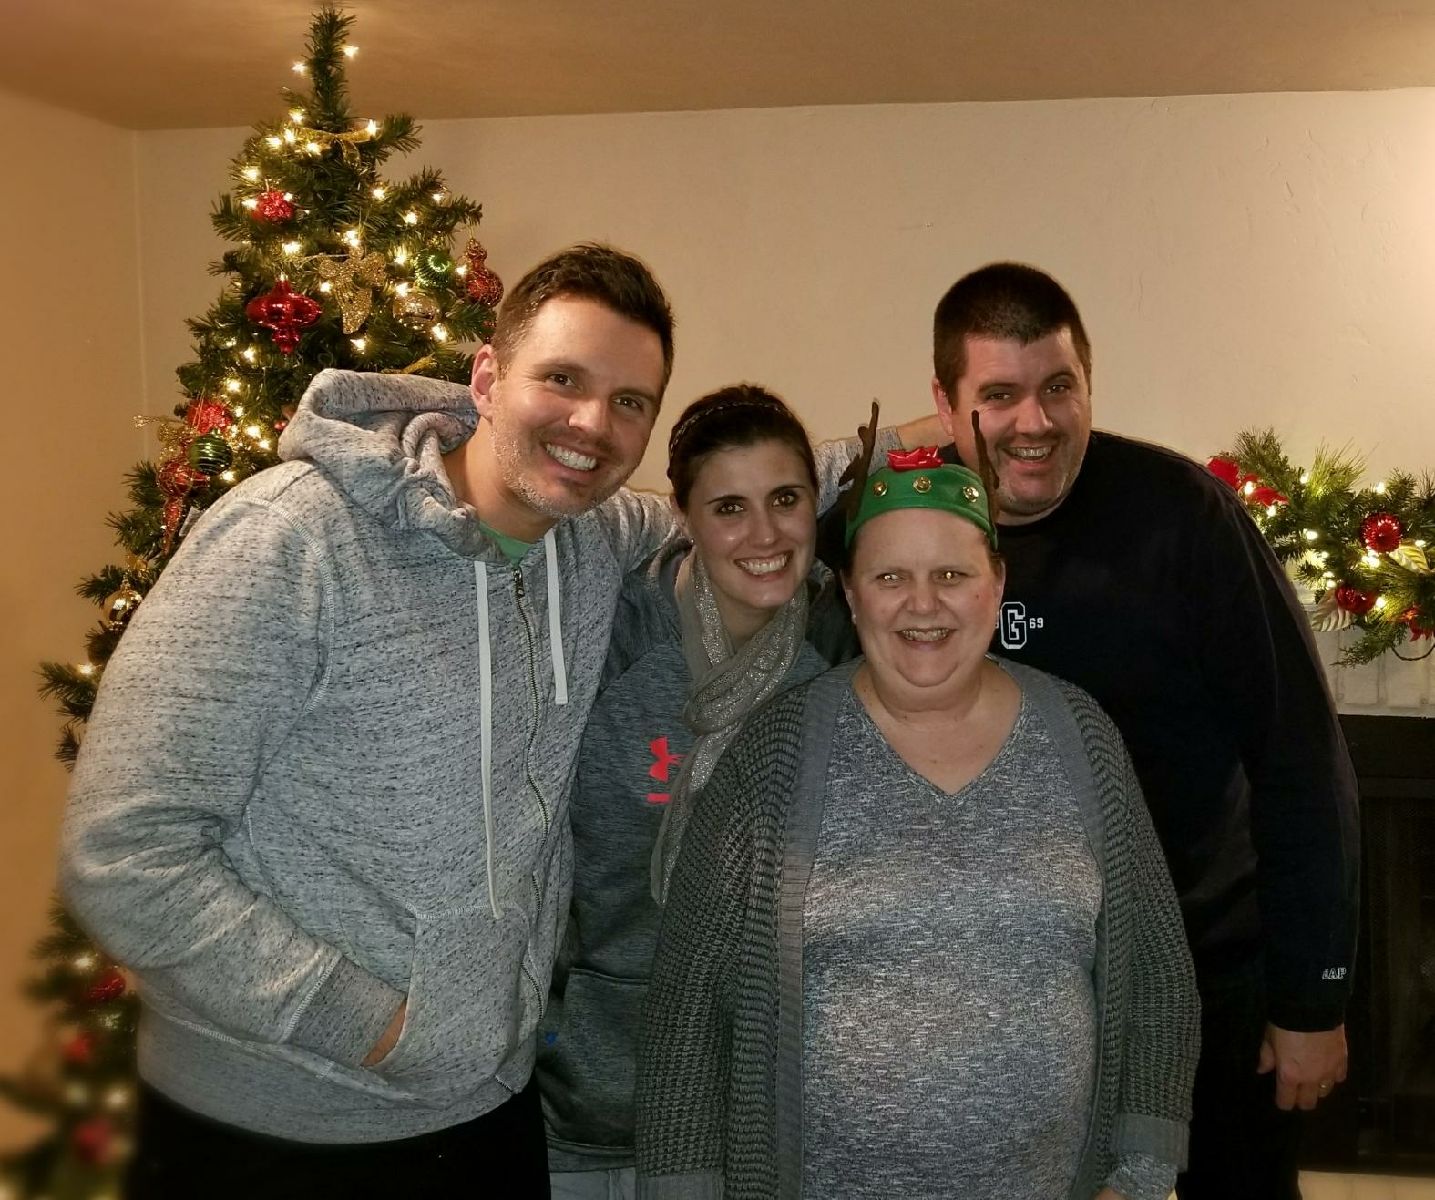 Christmas Fun 2017 - Cindy's Life Updates with Frontotemporal Dementia